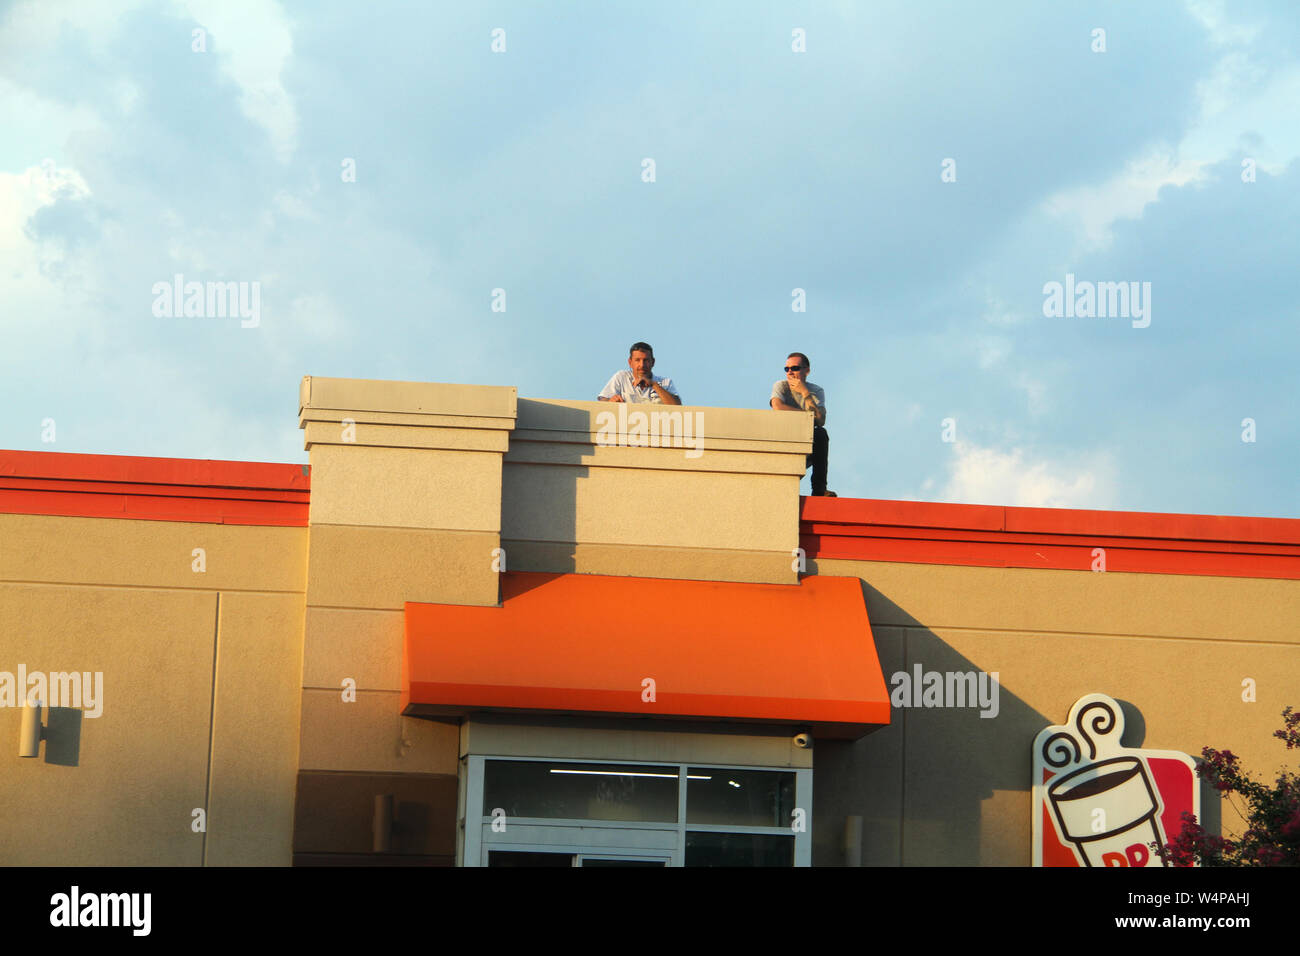 Men on top of a building in the U.S.A. Stock Photo